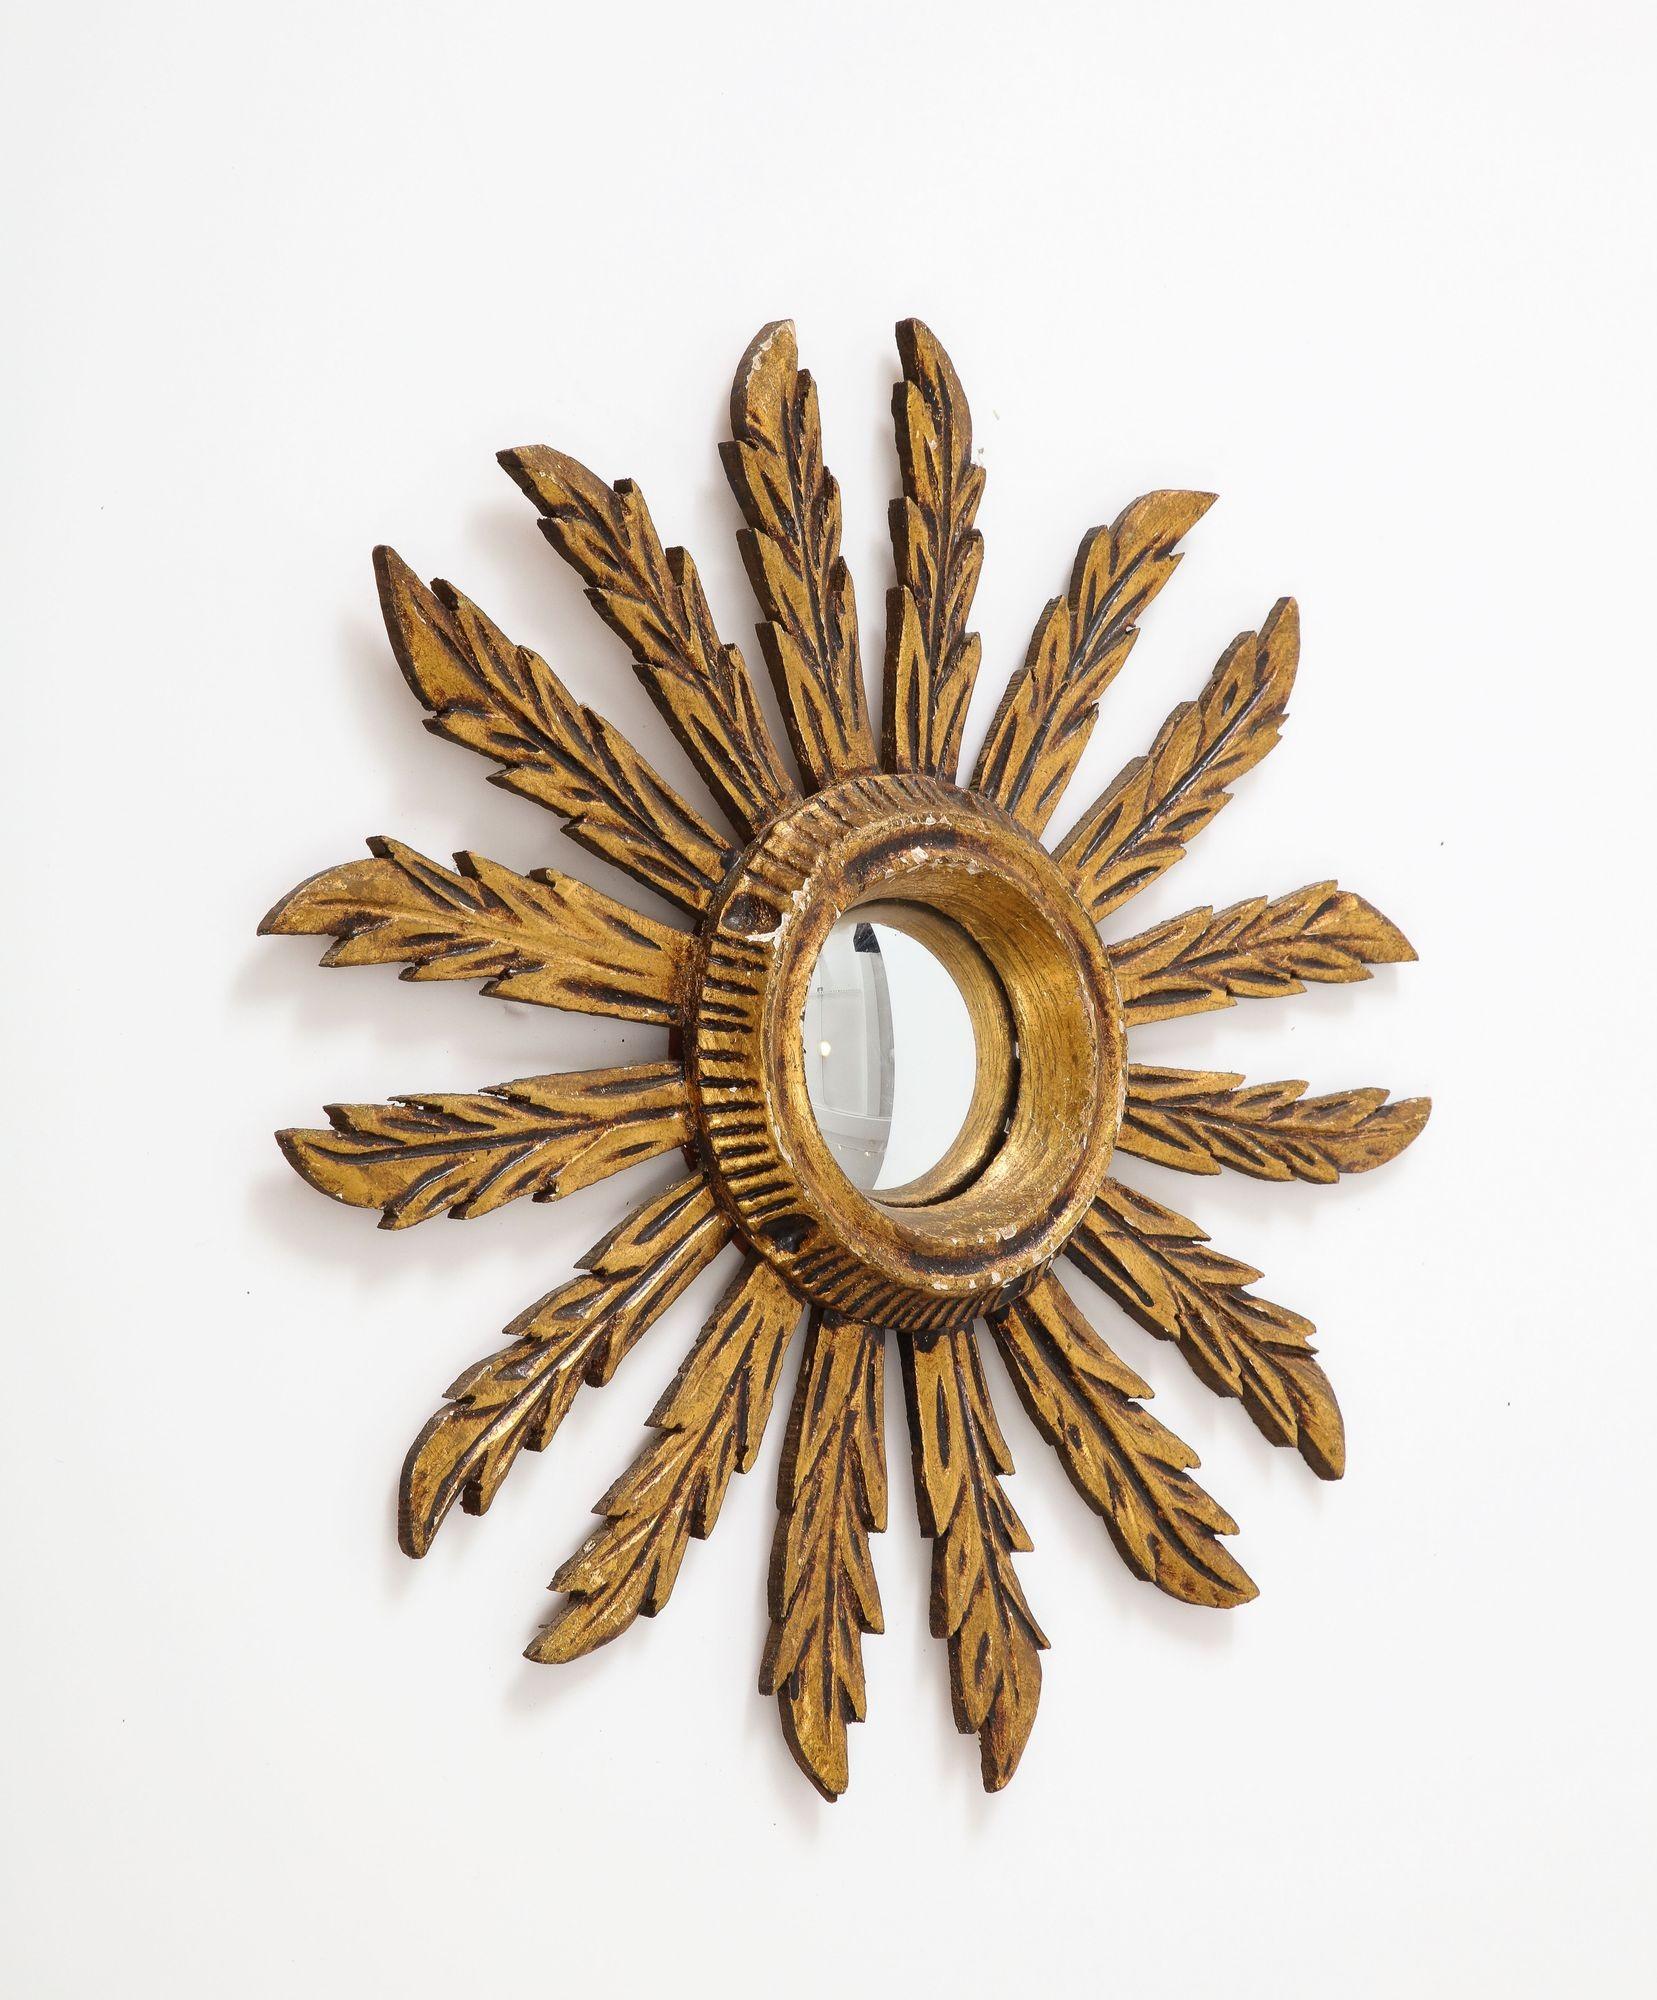 A Mid 20th century dimunutive giltwood starburst mirror. Wear consistent with age and use.